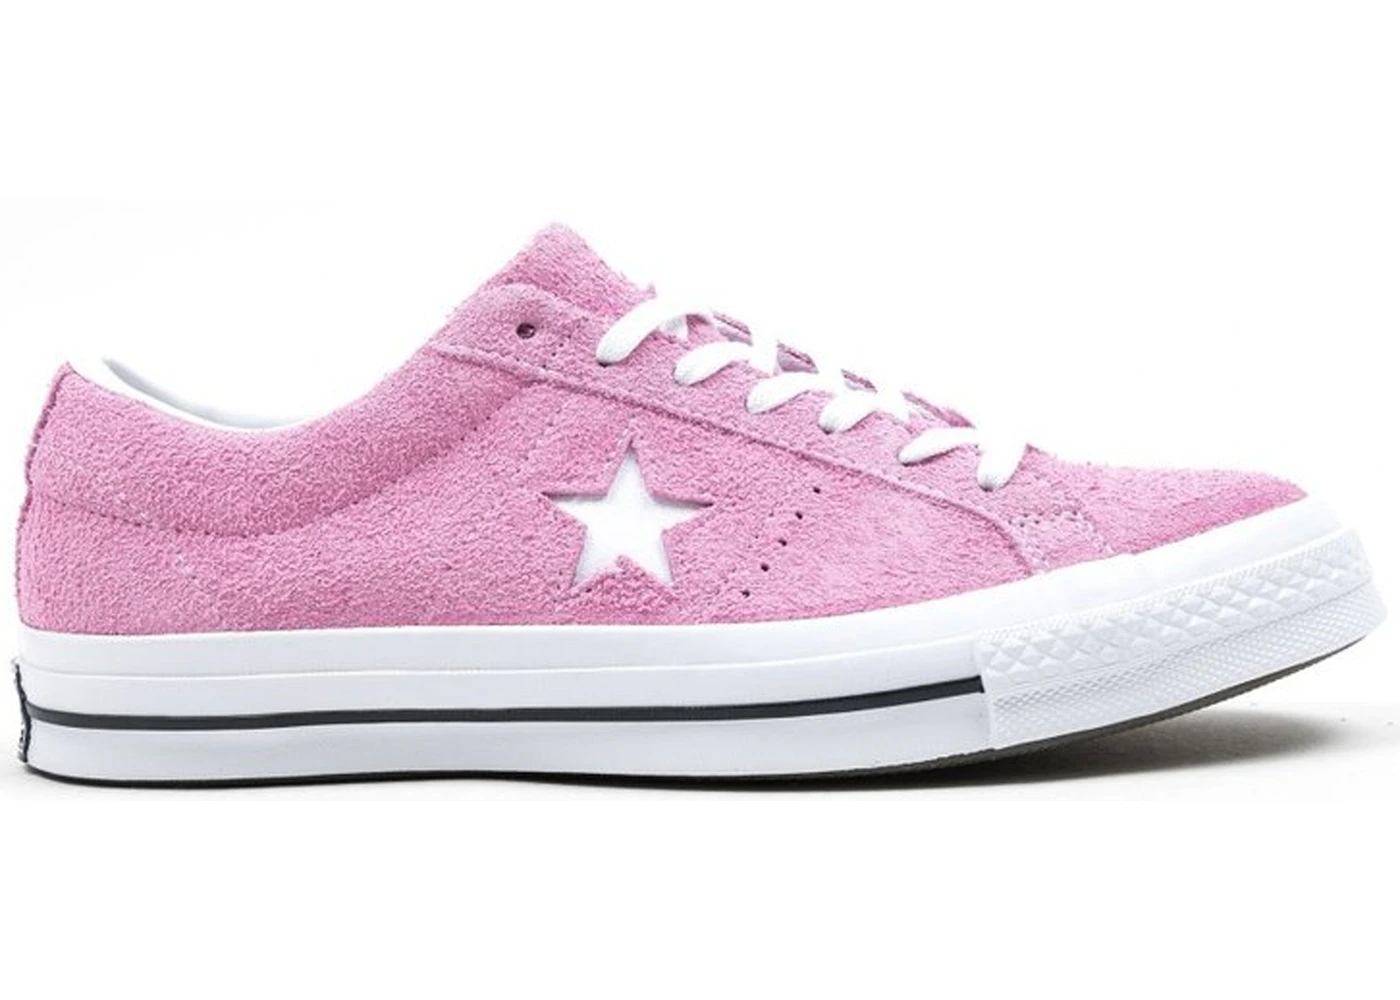 Converse One Star Ox Pink Men's - 159492C - US